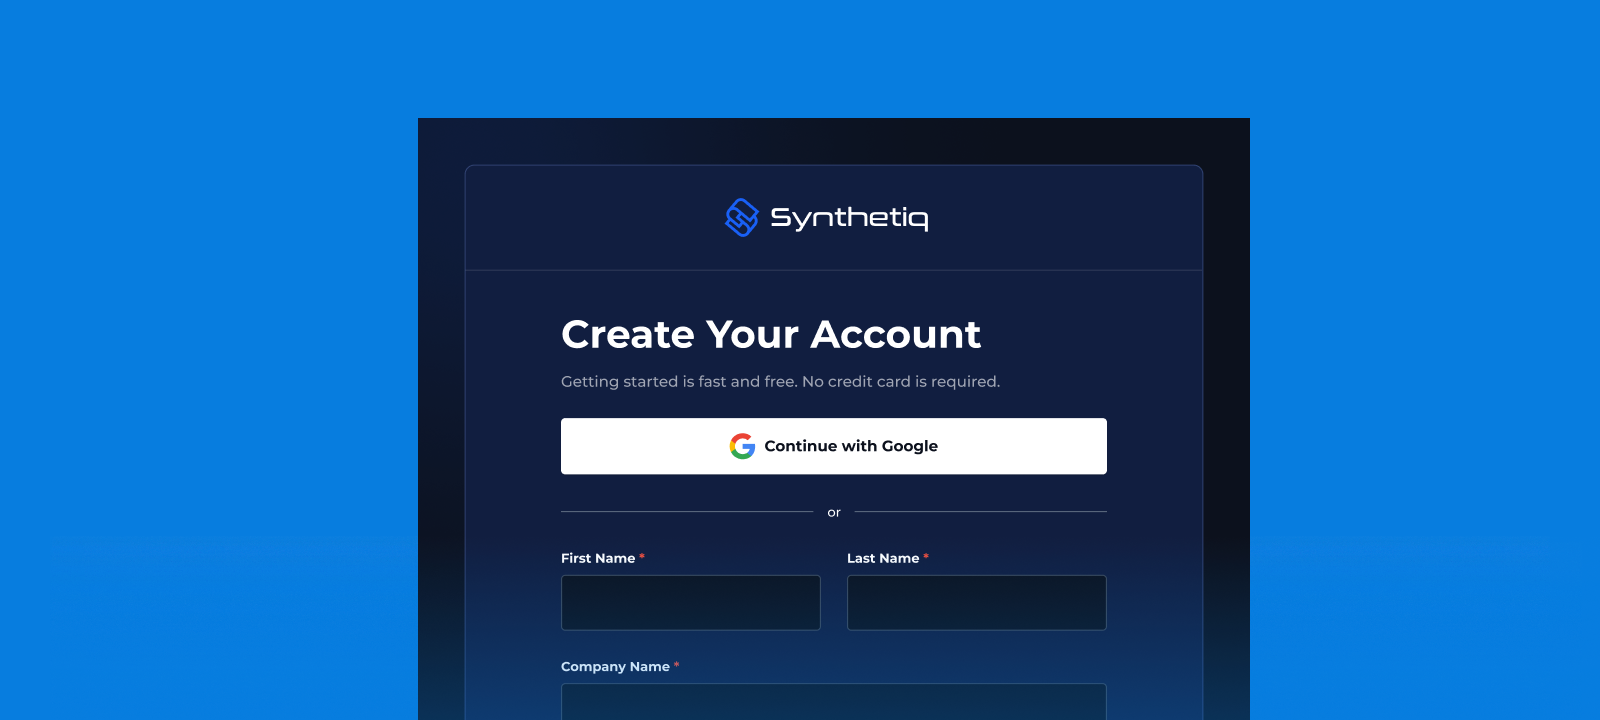 Unleashing the Power of AI-Driven OCR with DigiFi's Synthetiq Integration